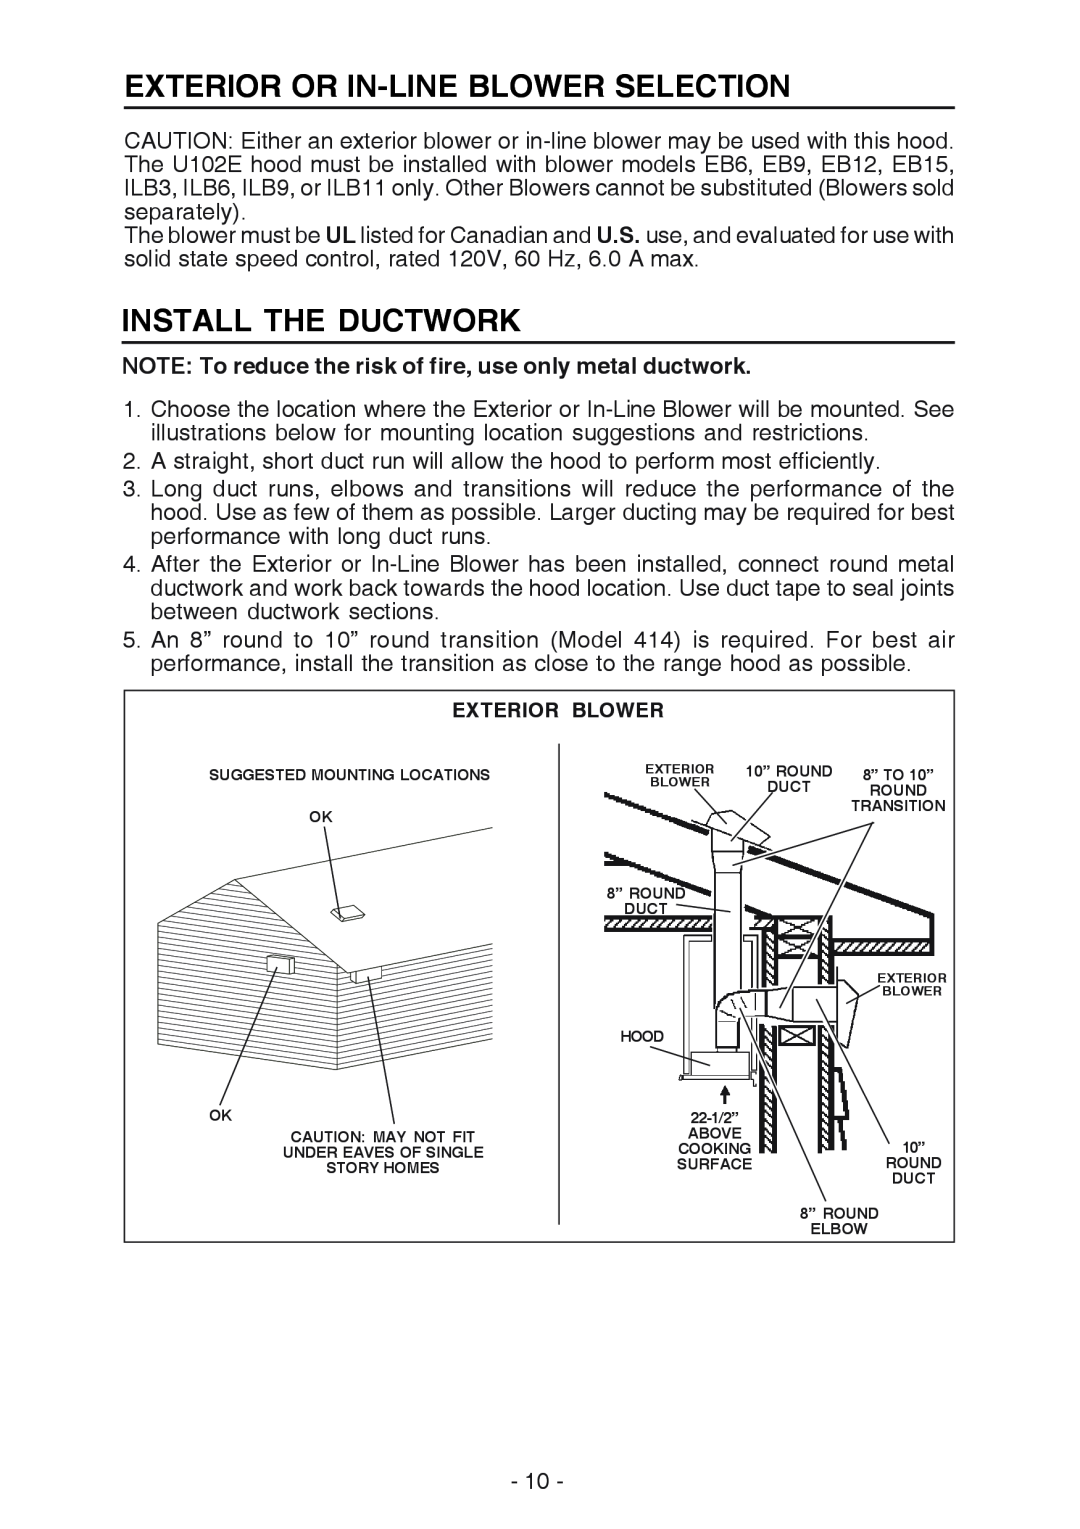 Best U102E manual Exterior Or In-Line Blower Selection, Install The Ductwork 